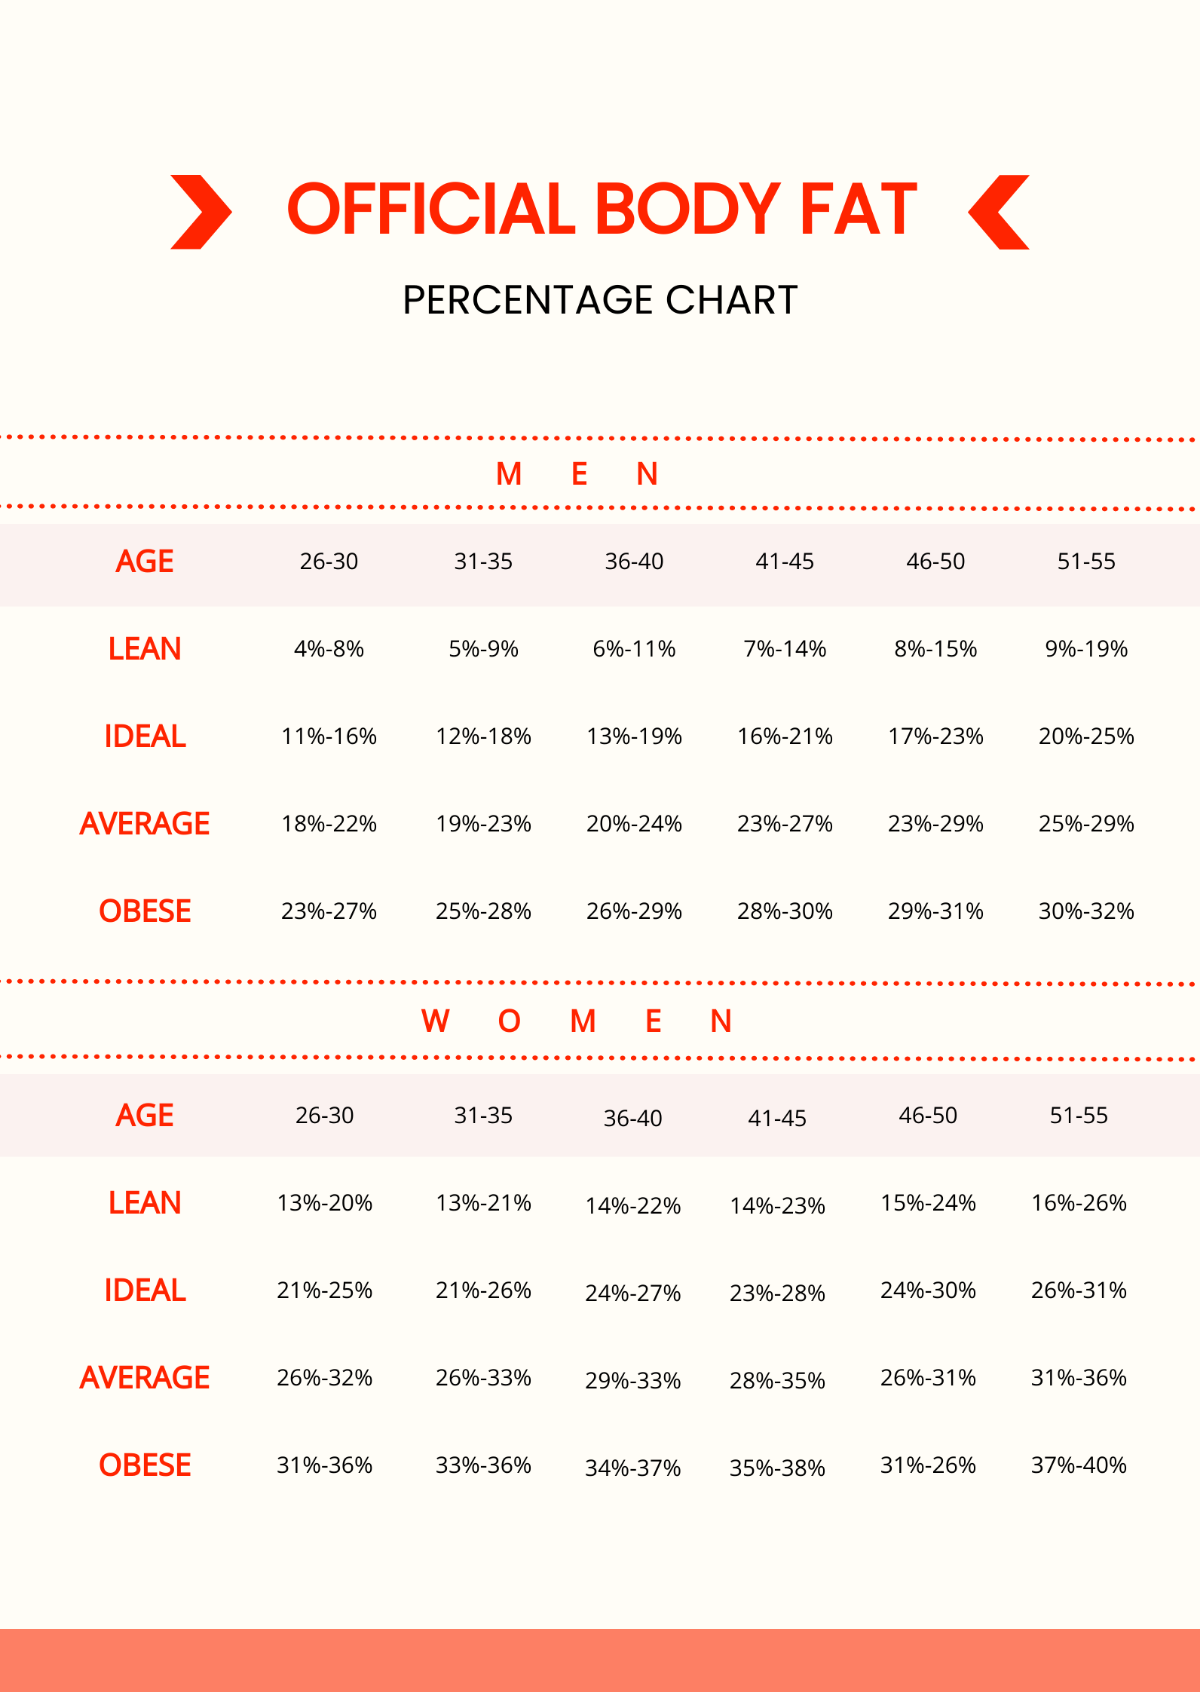 Official Body Fat Percentage Chart